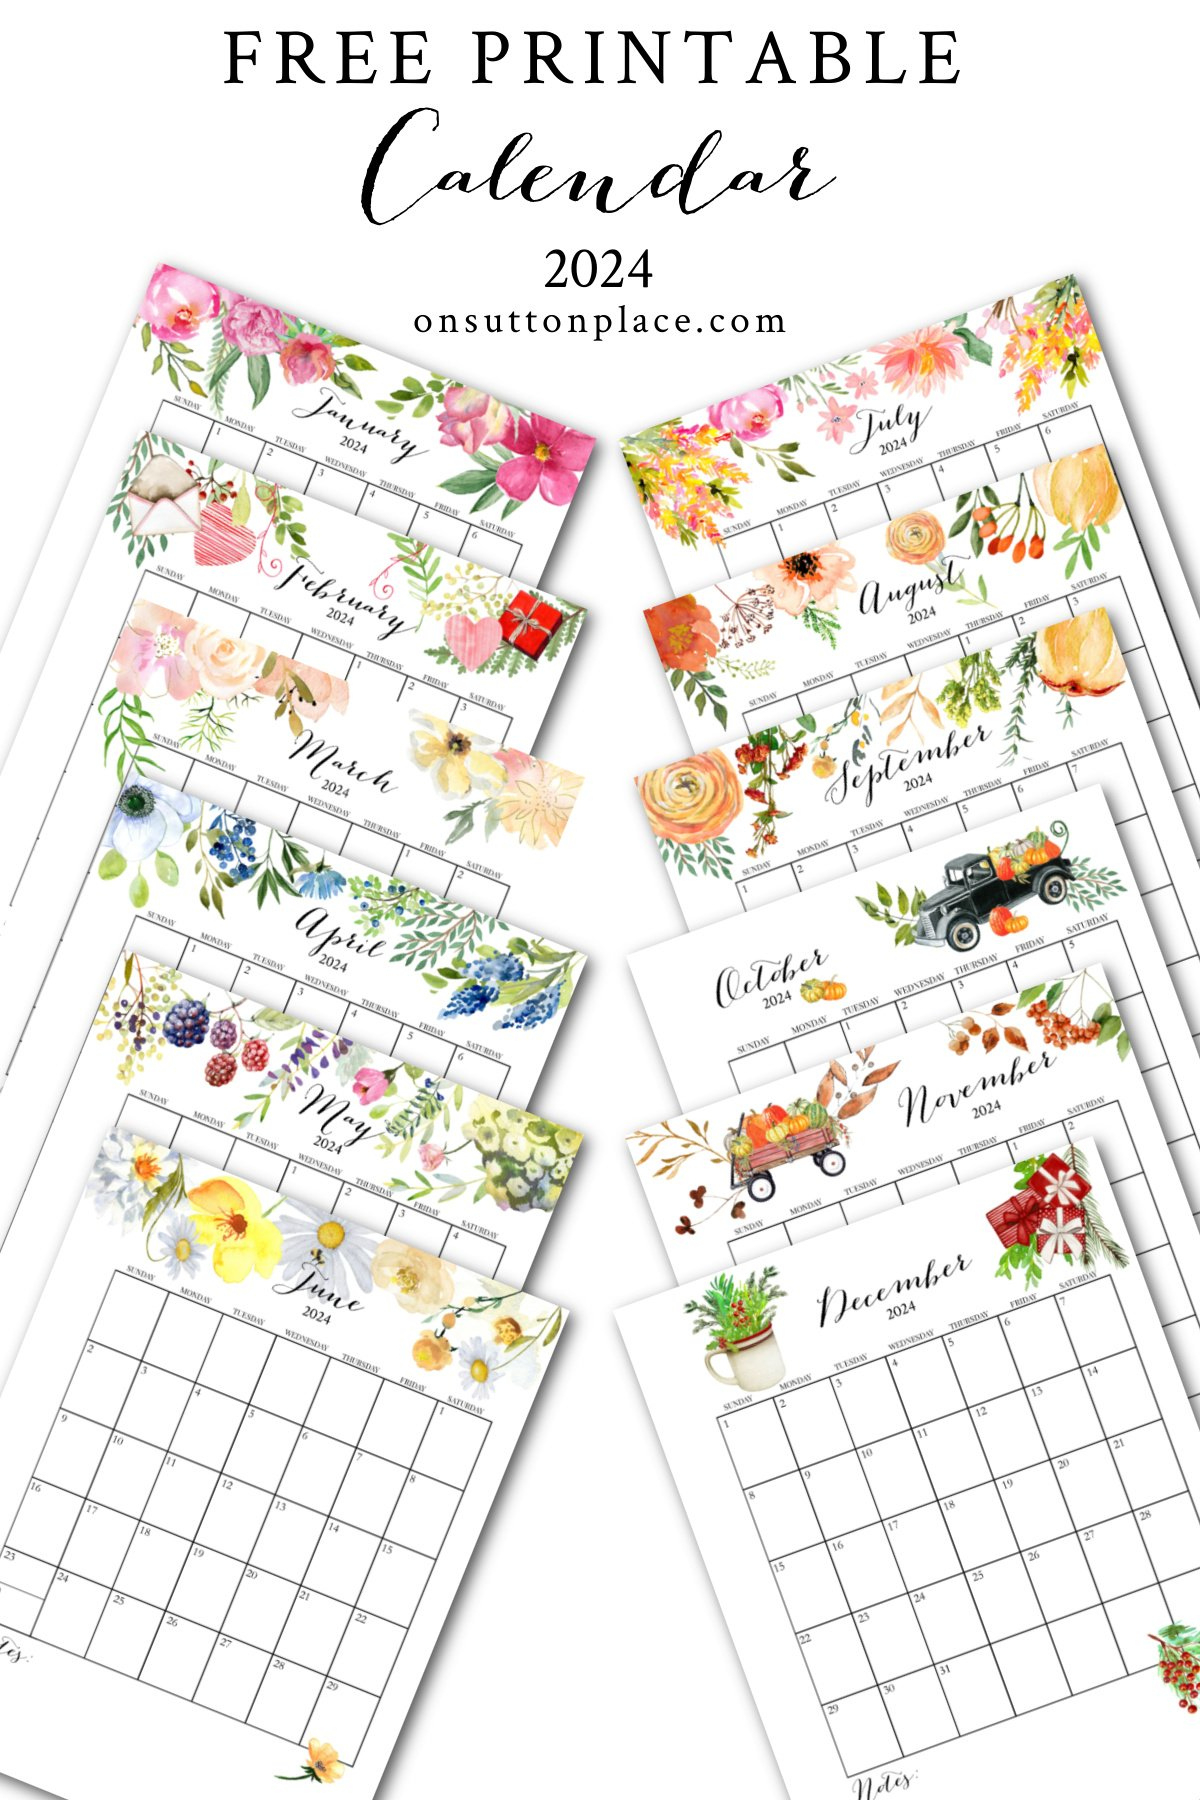 2024 Free Printable Calendar With Planner Pages - On Sutton Place | Printable Calendar 2024 Free Cute